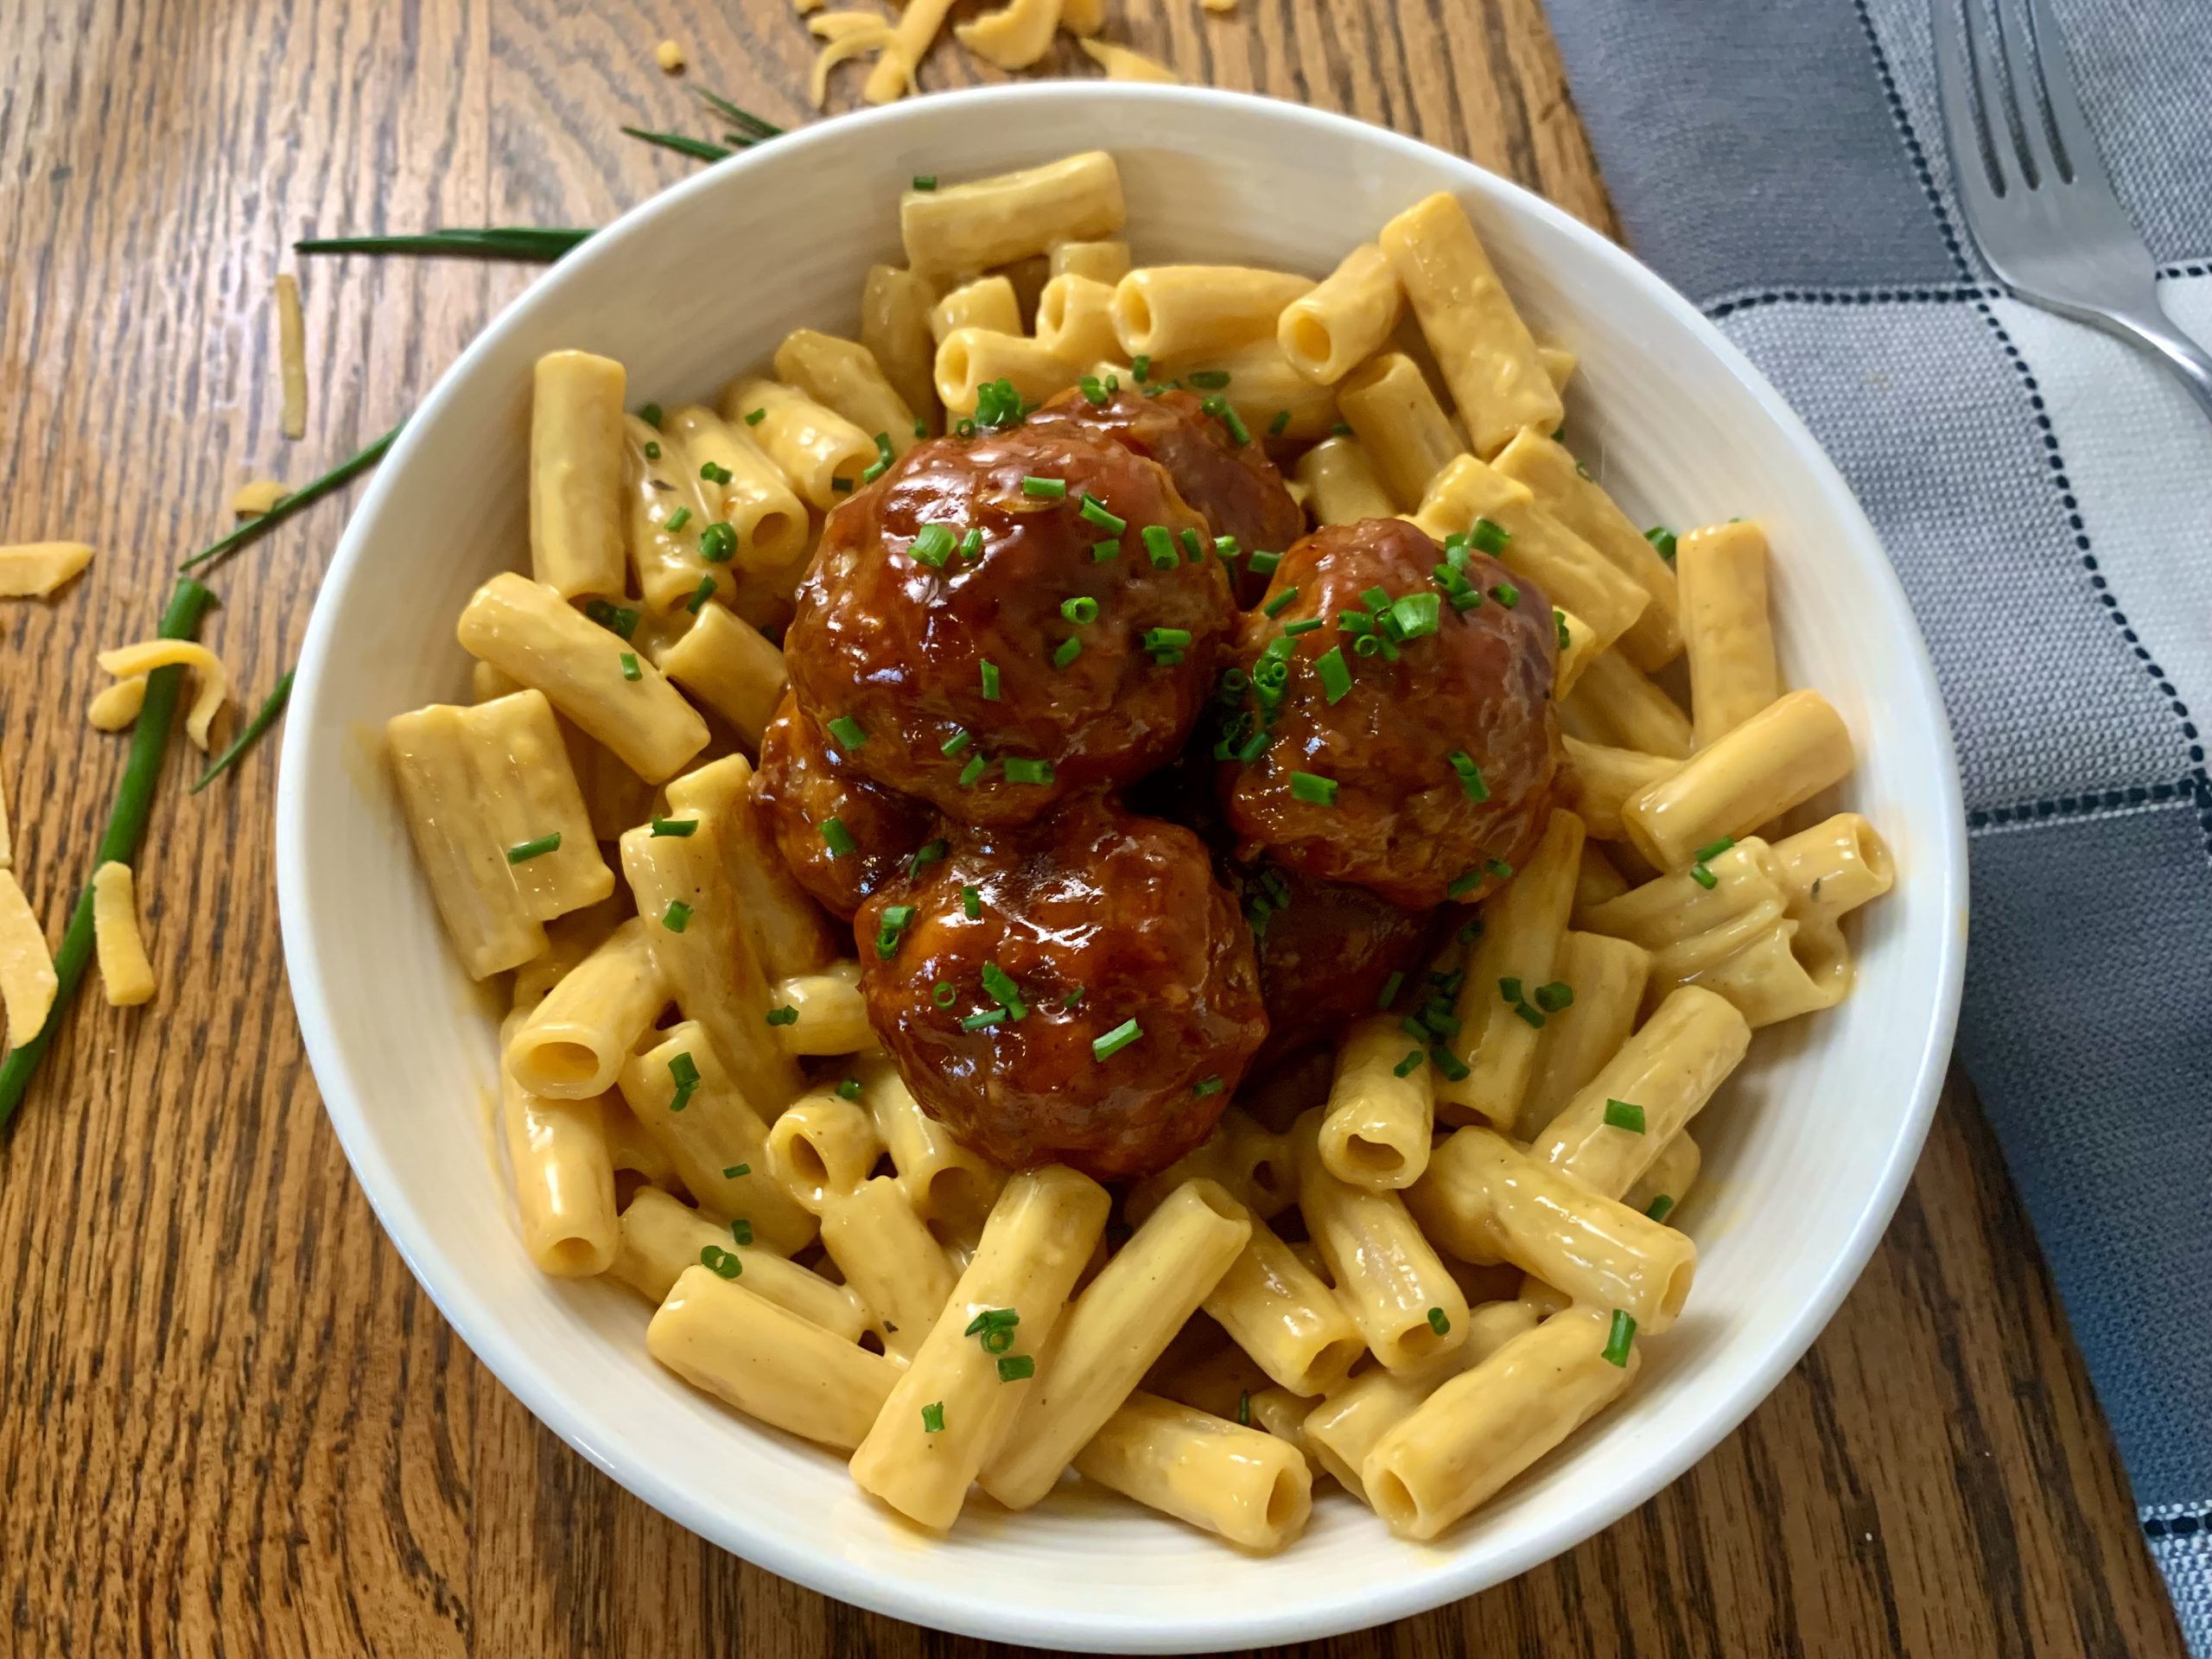 BBQ Meatball-Topped Mac & Cheese